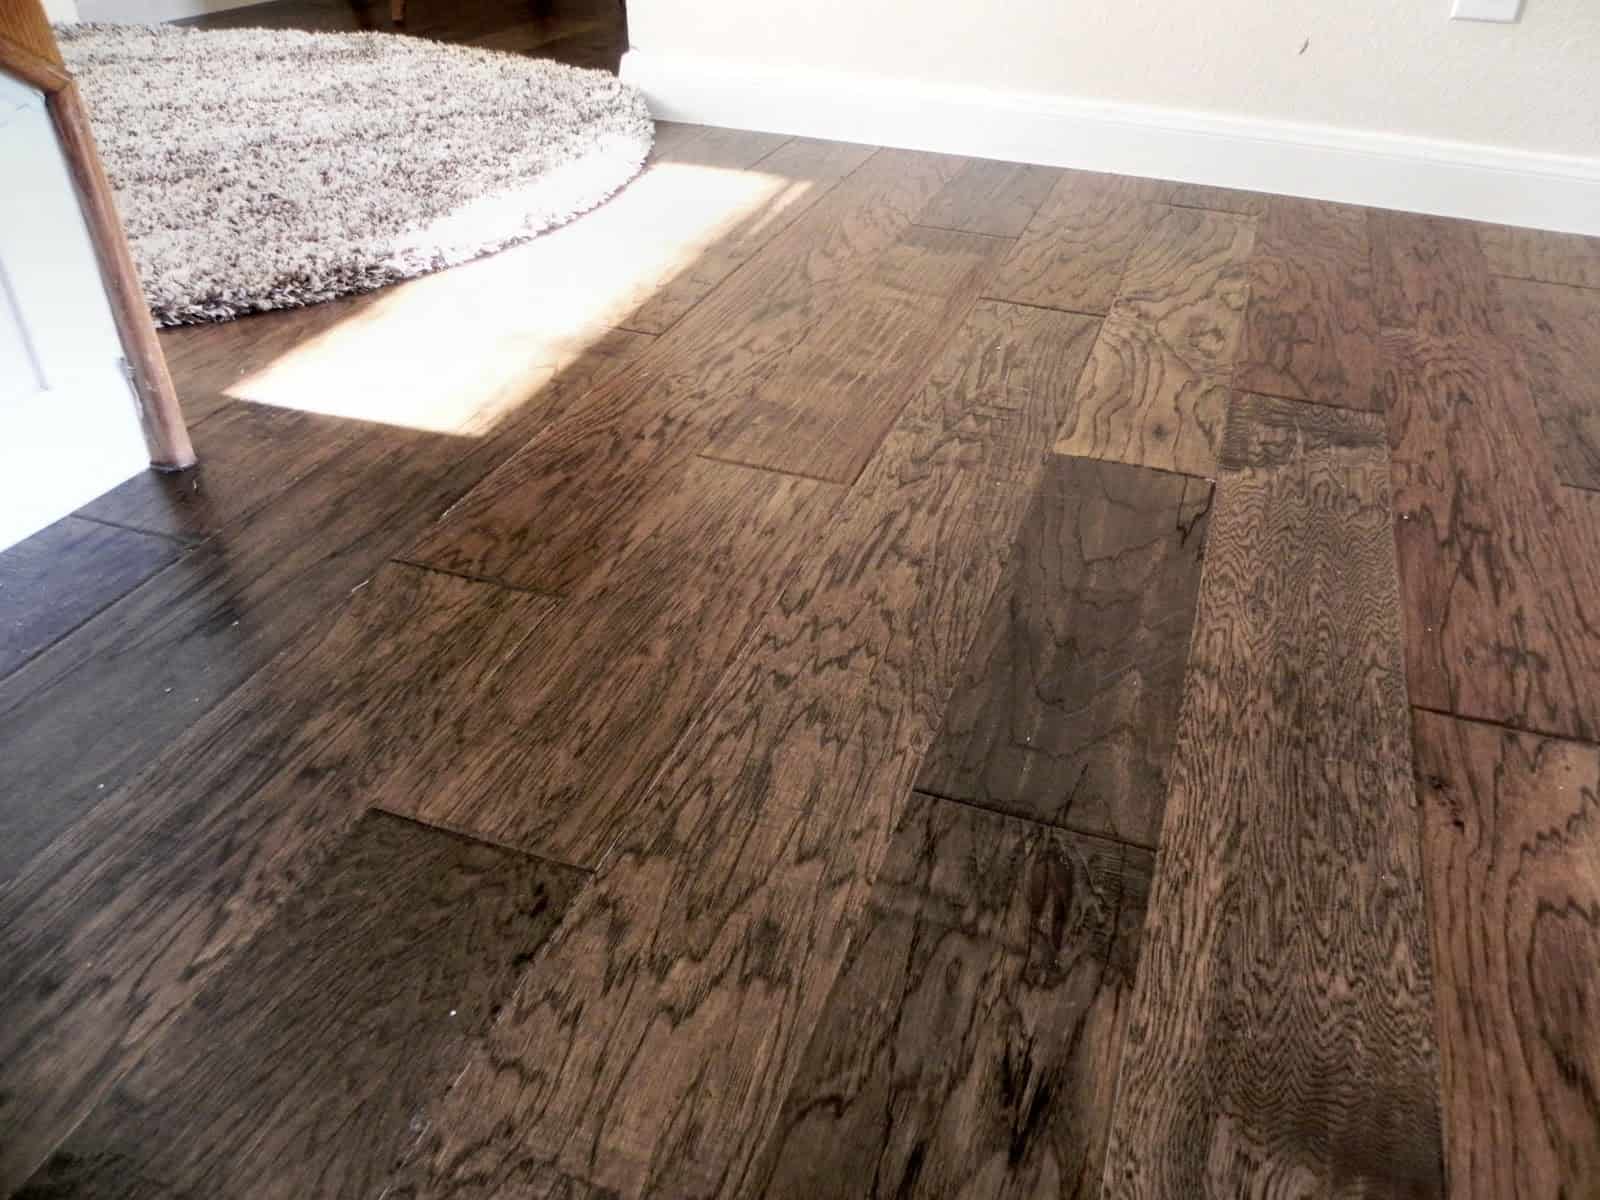 How To Treat Wood Flooring That Is, How To Treat Laminate Floors